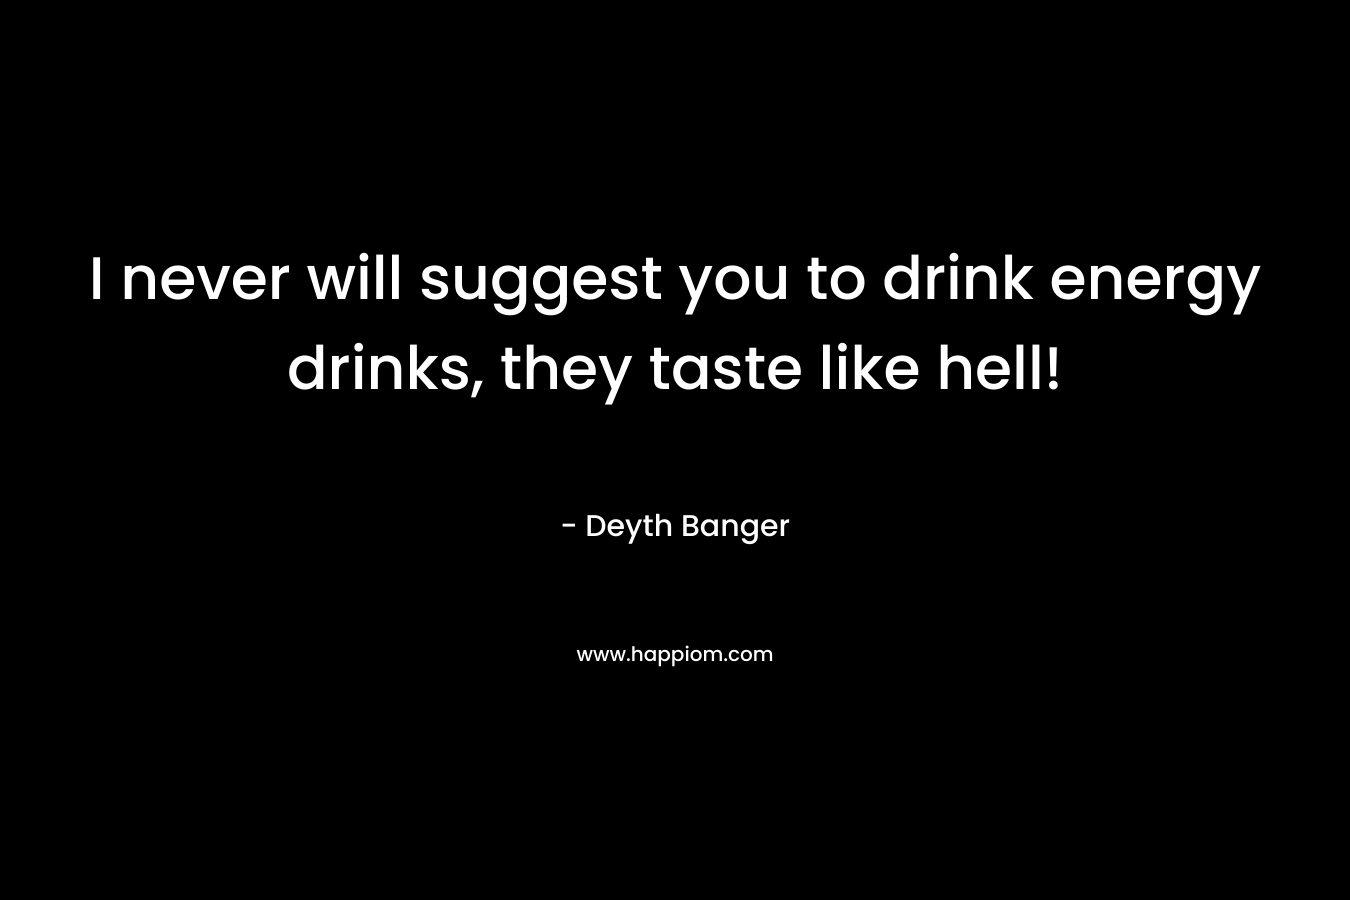 I never will suggest you to drink energy drinks, they taste like hell! – Deyth Banger